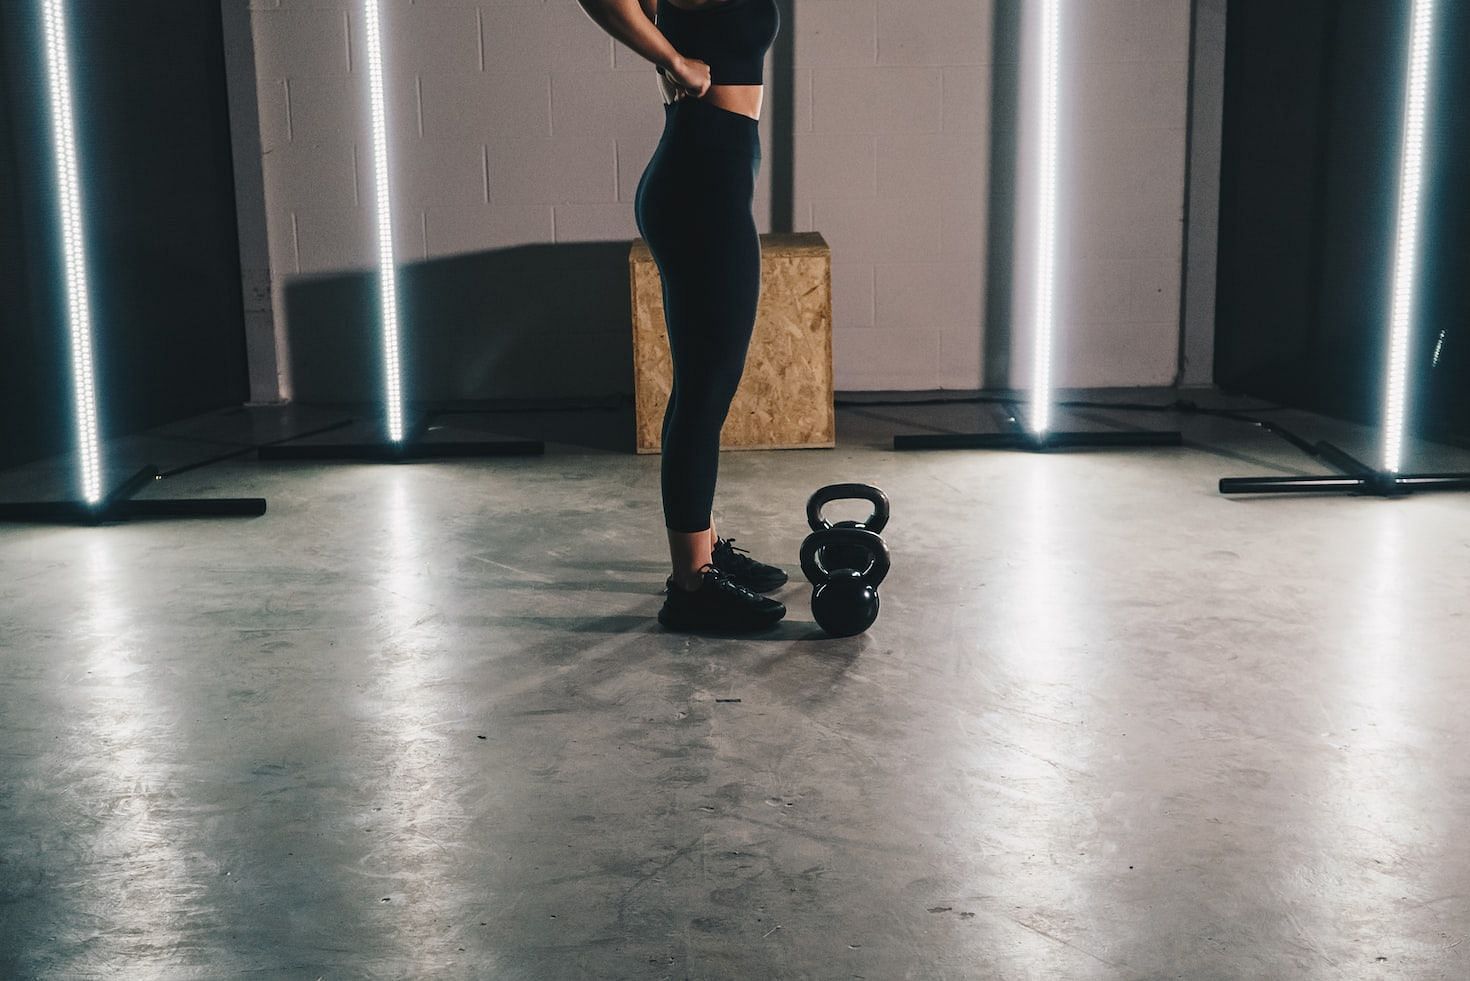 The kettlebell swing is a full body exercise. (Pic via: Ambitious Creative - Rick Barrett/ Unsplash)